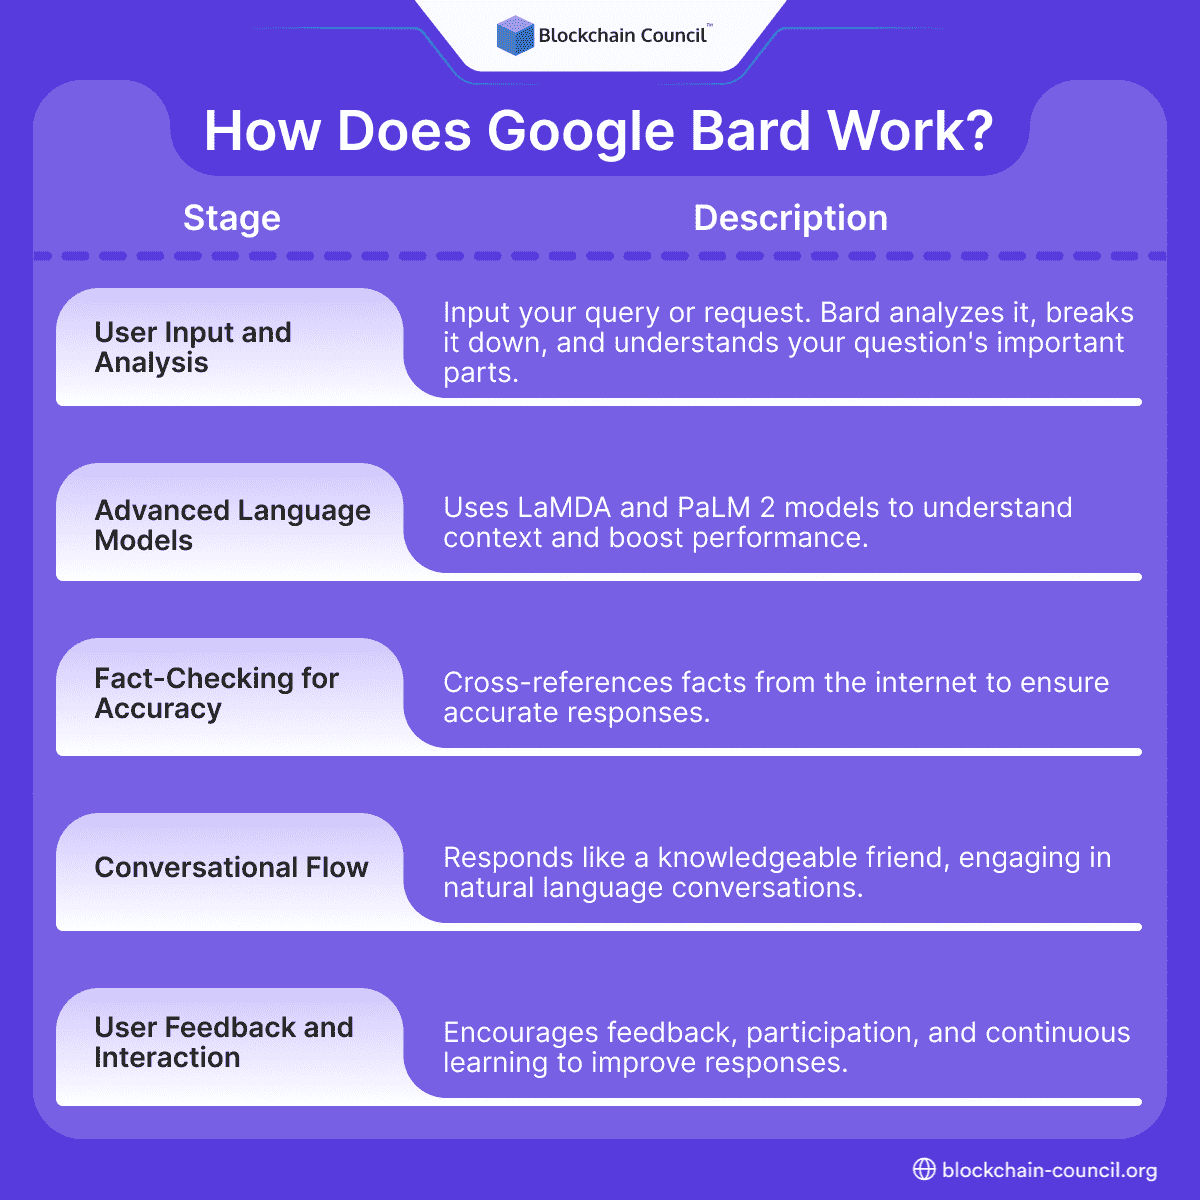 How Does Google Bard Work?